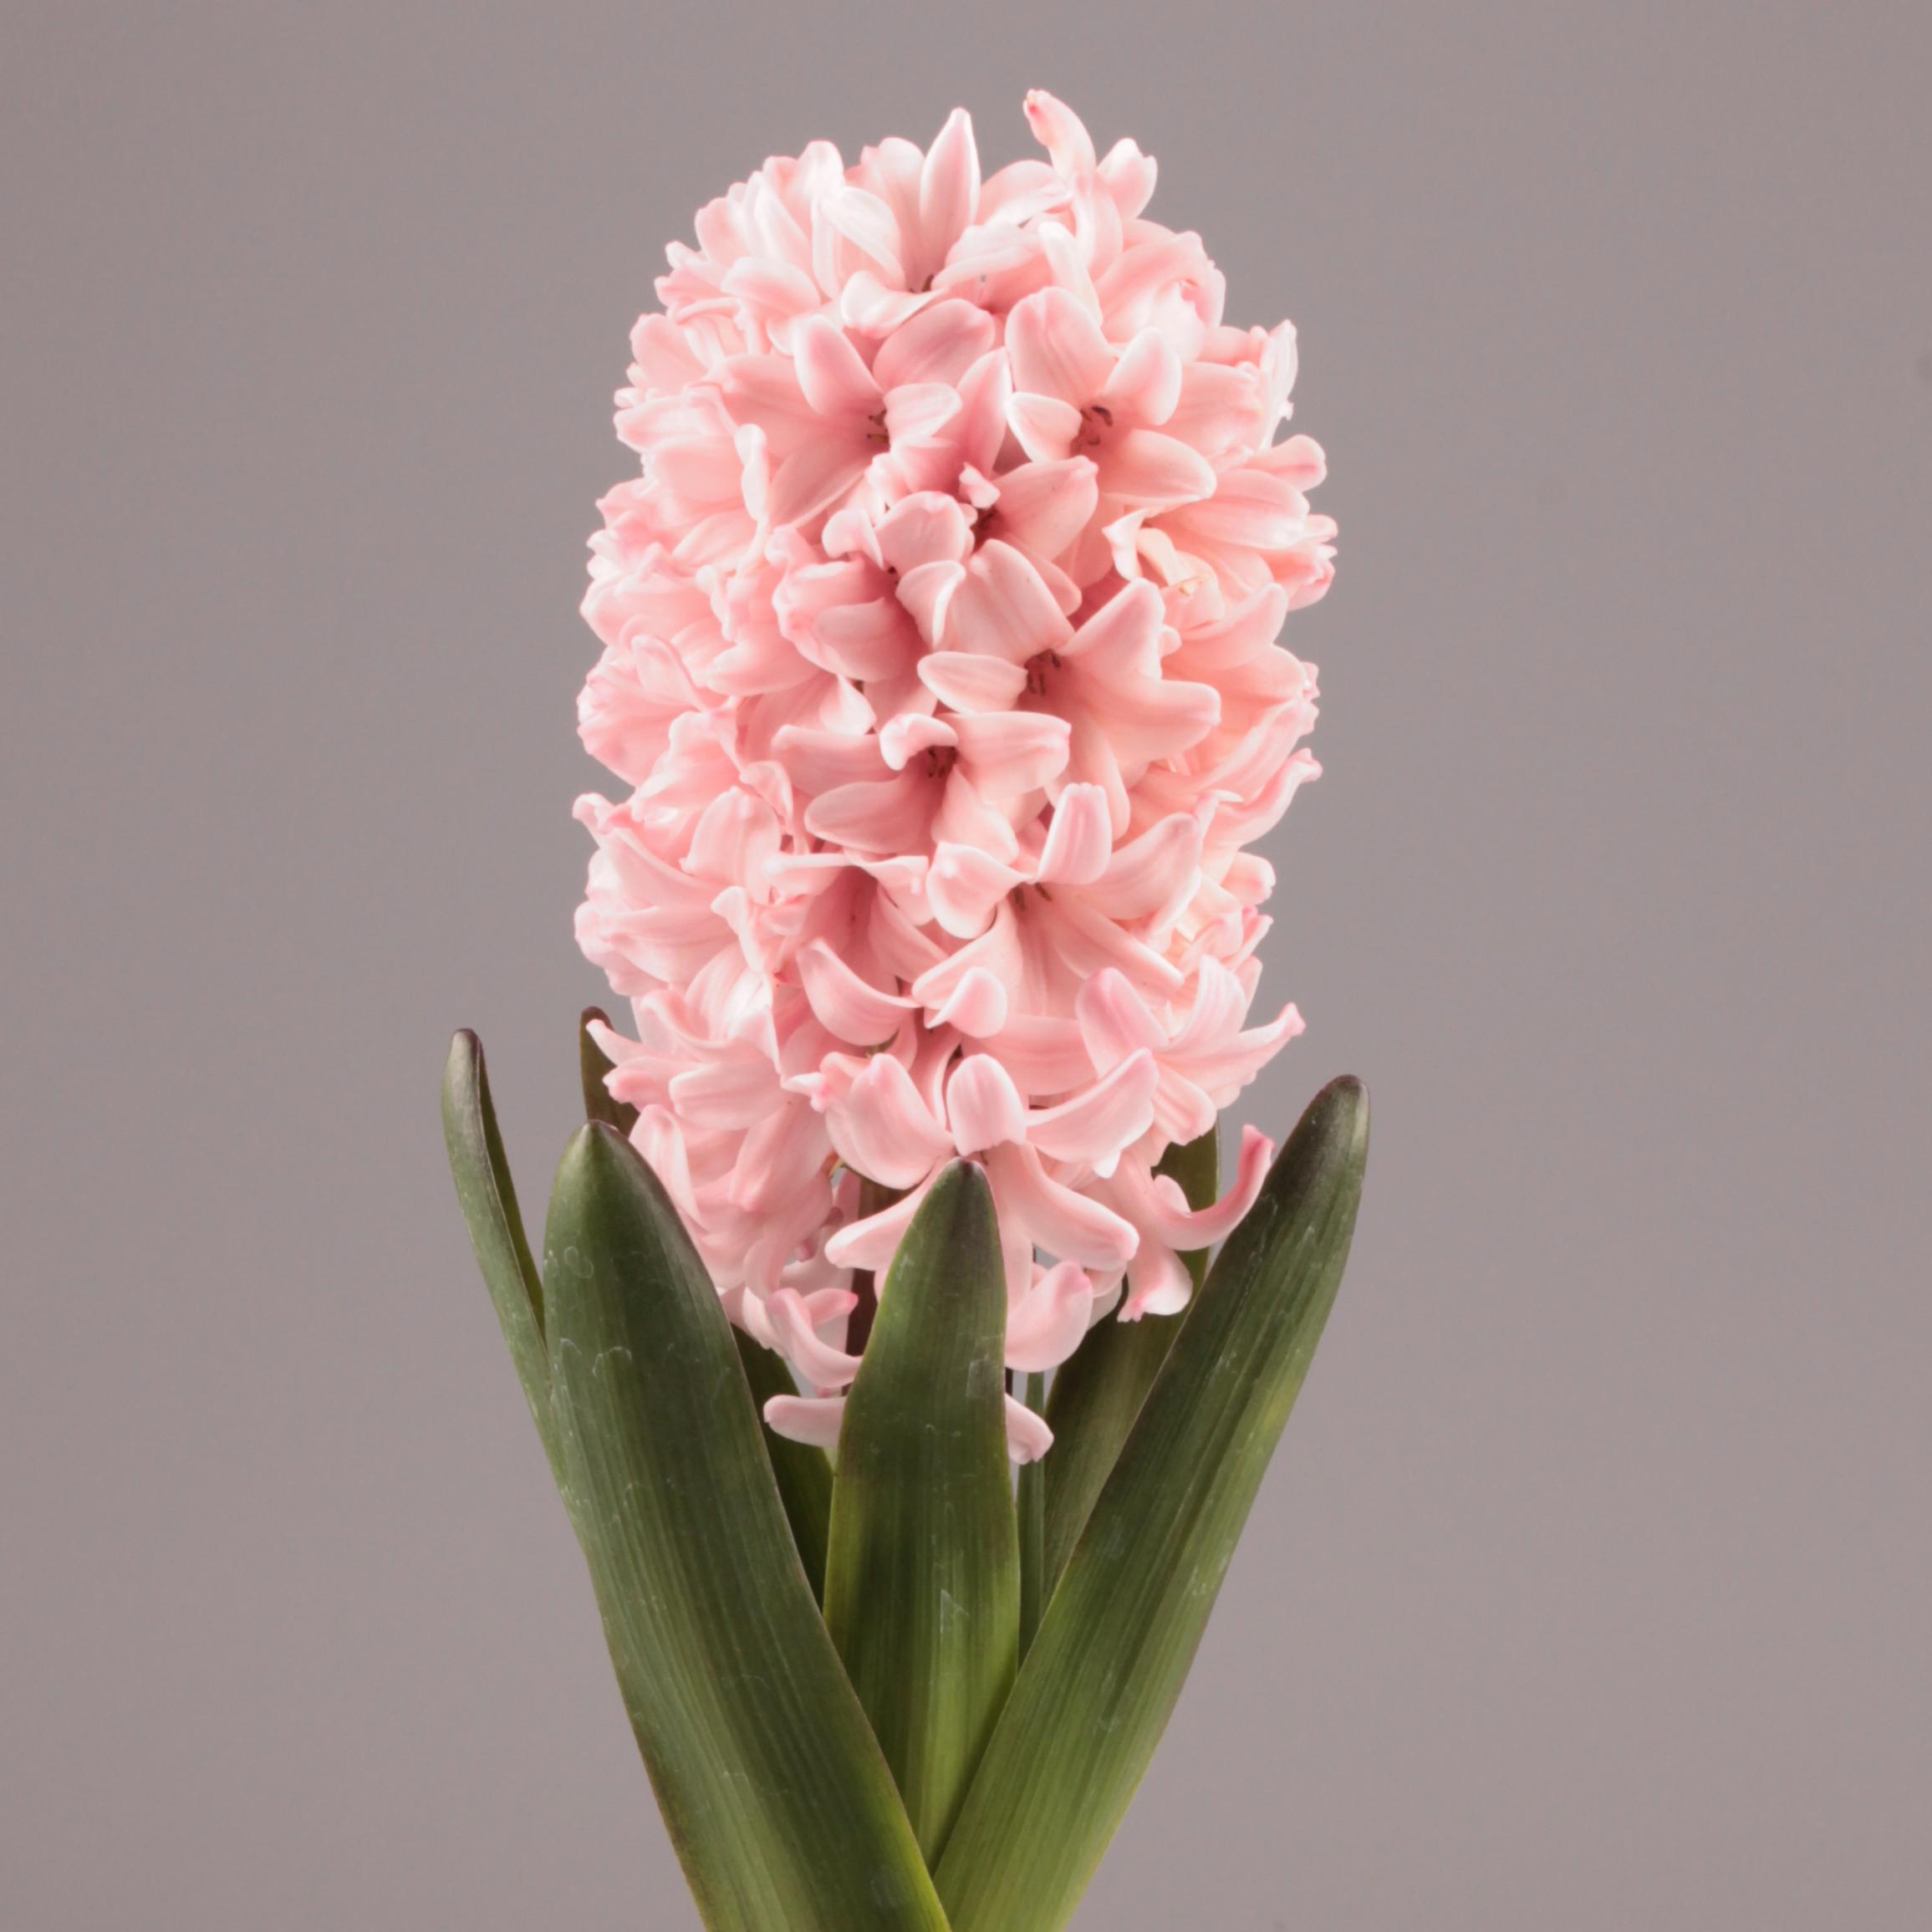 Hyacinth Apricot Passion from Leo Berbee Bulb Company